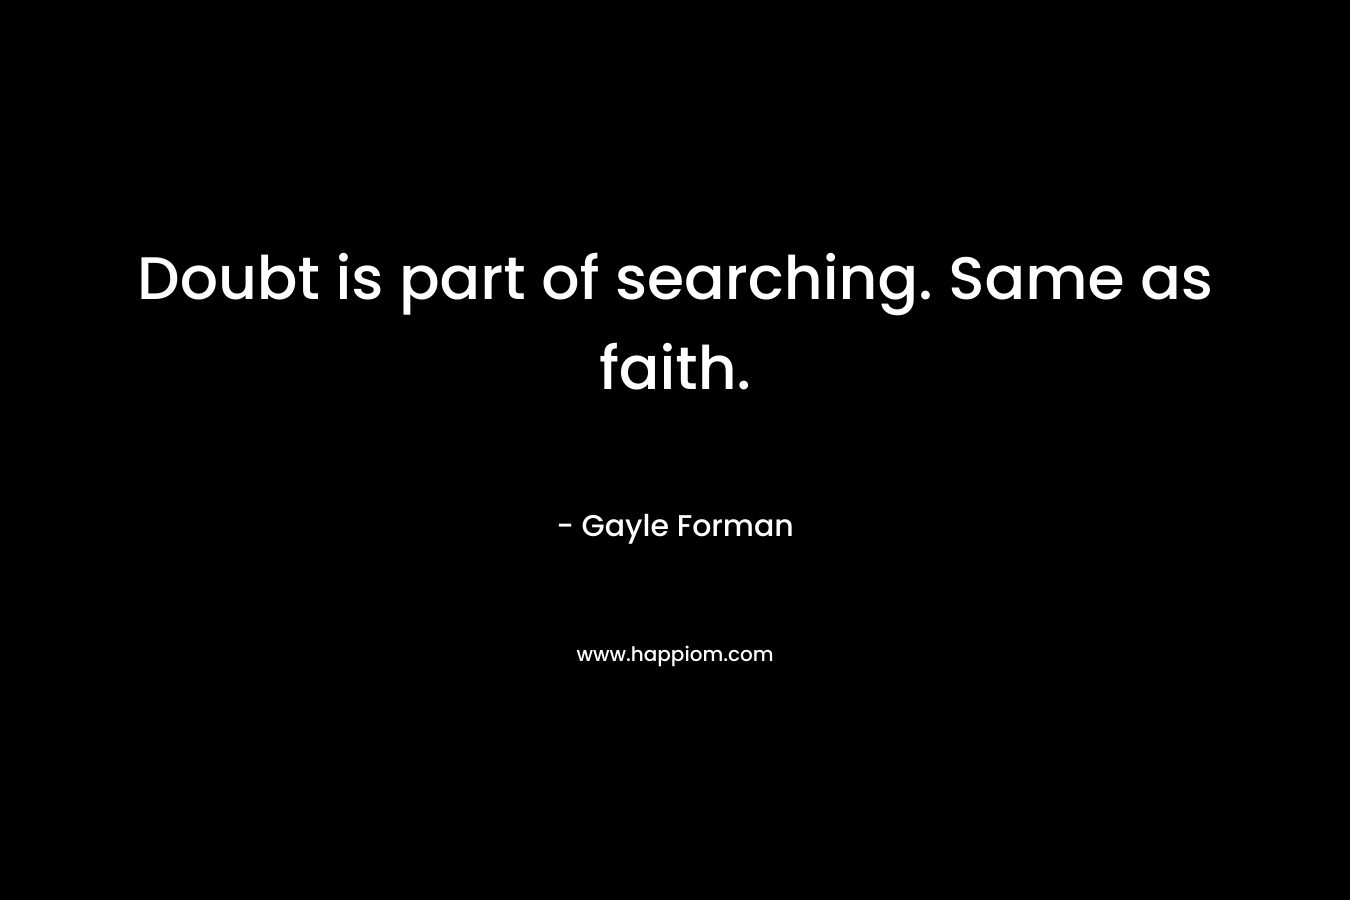 Doubt is part of searching. Same as faith. – Gayle Forman